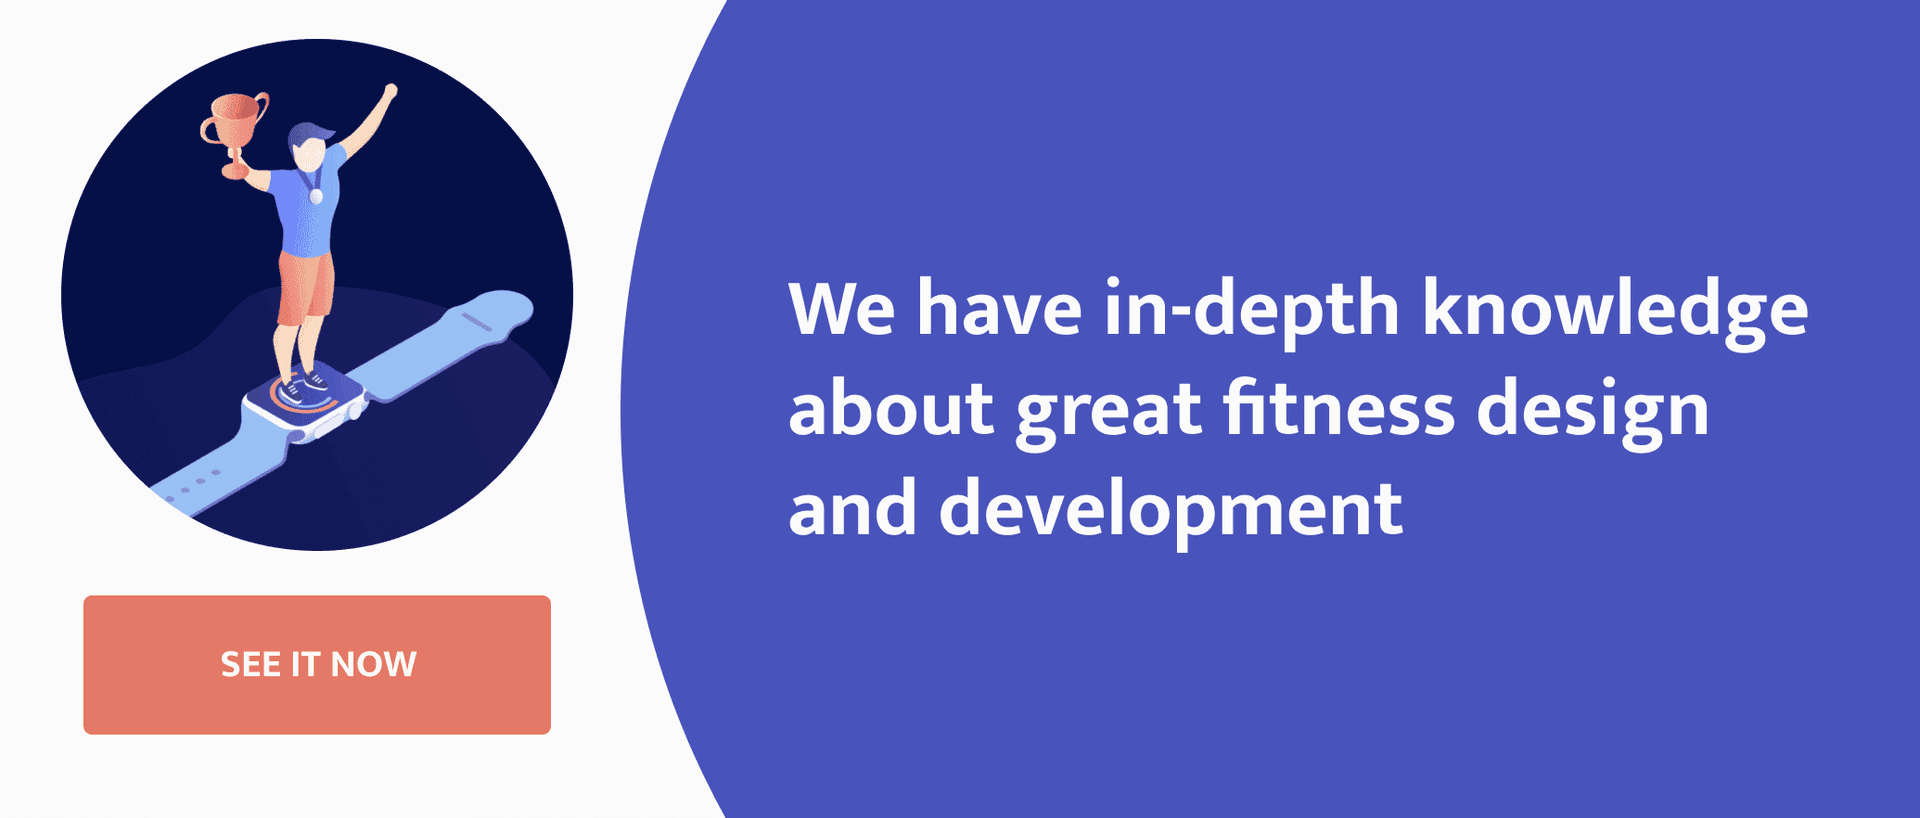 great fitness design and development